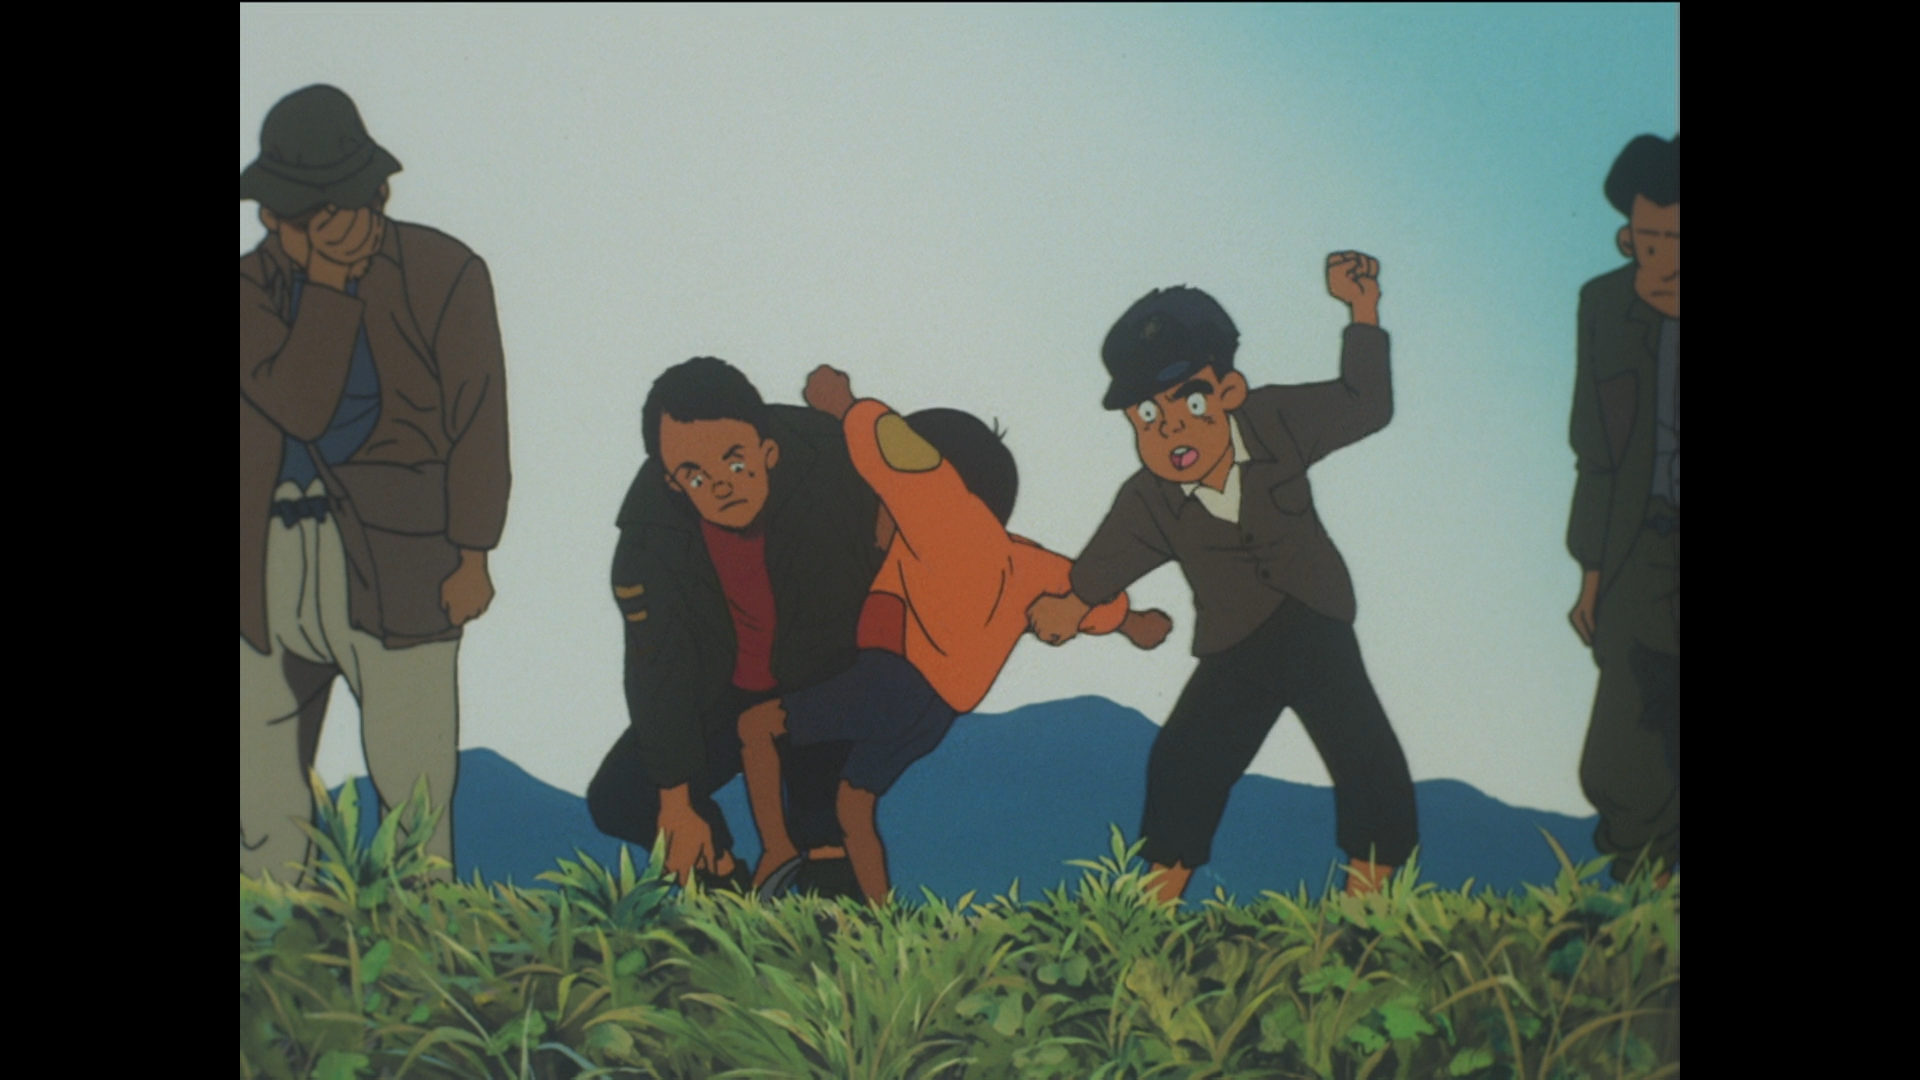 Barefoot Gen Movies 1 2 1983 1986 Blu Ray Forum Images, Photos, Reviews